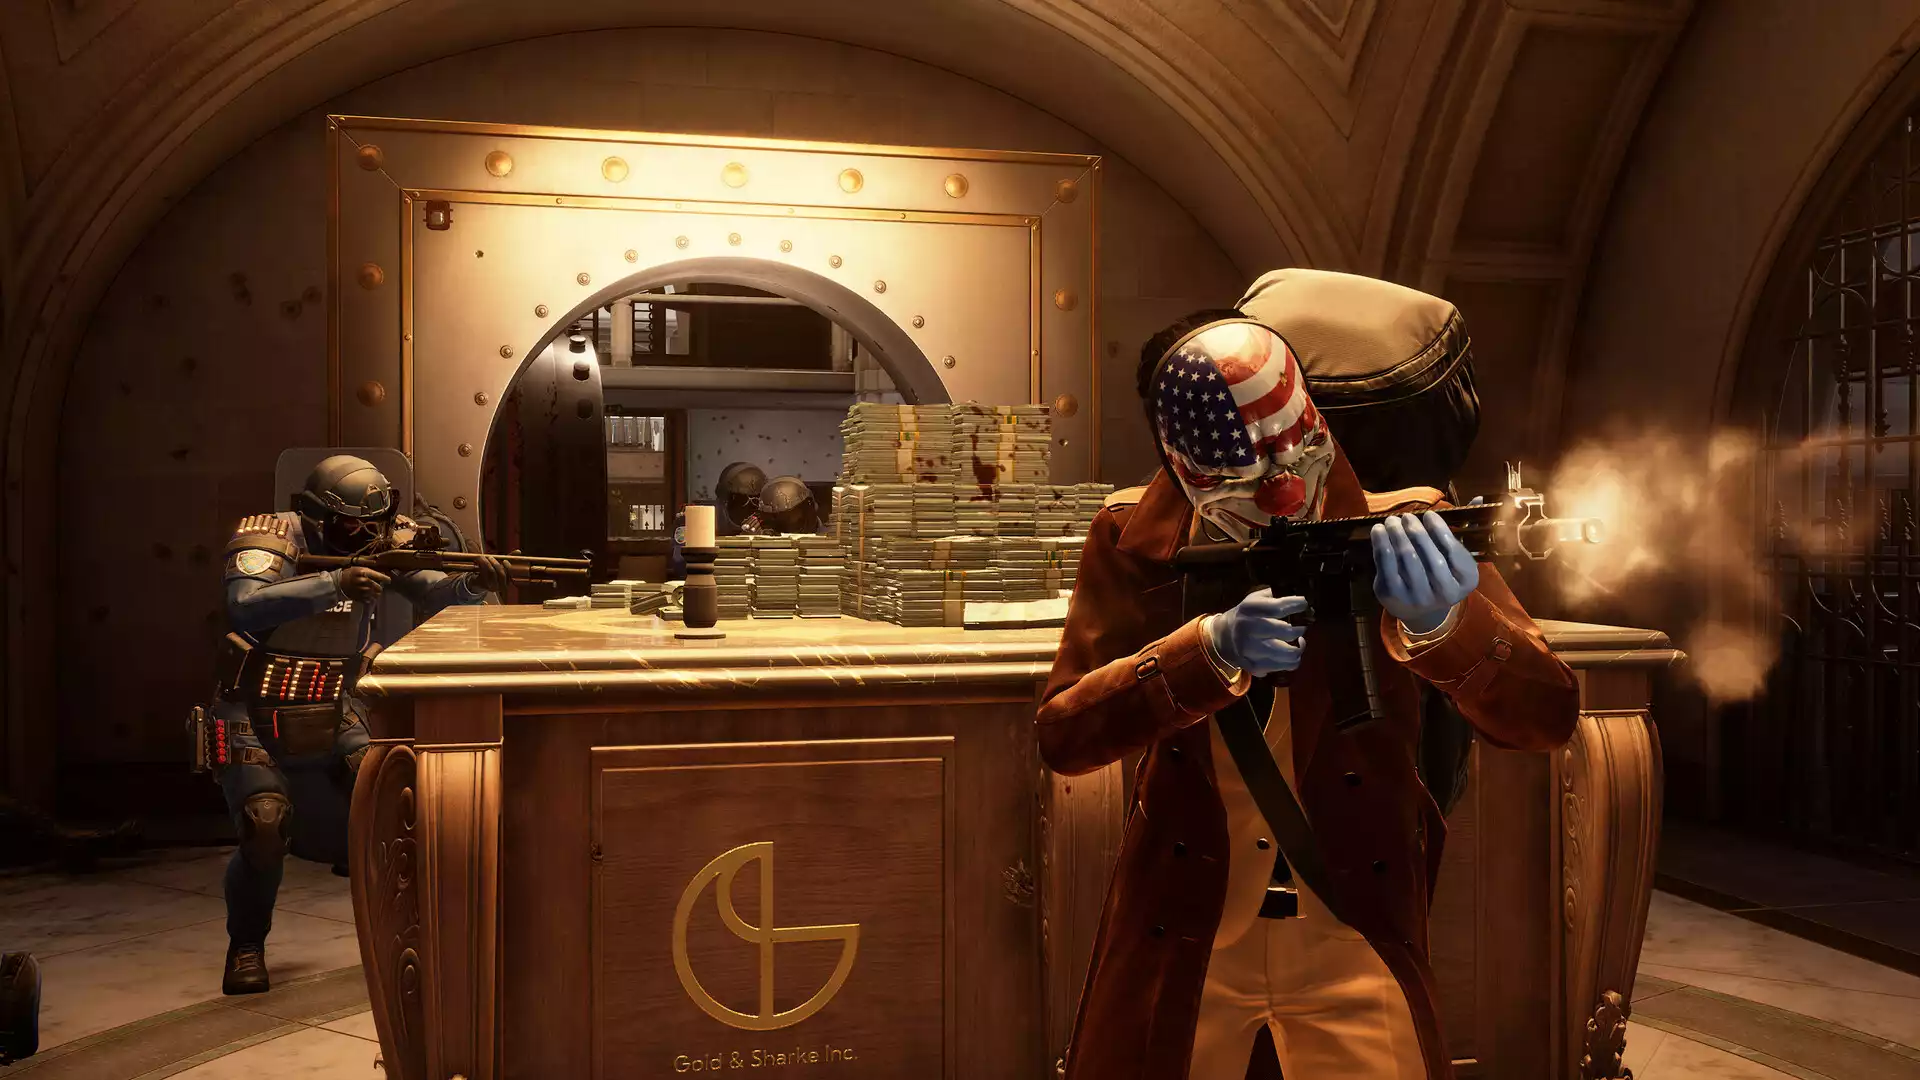 Will you need PlayStation Plus or Xbox Live for Payday 3? All online requirements